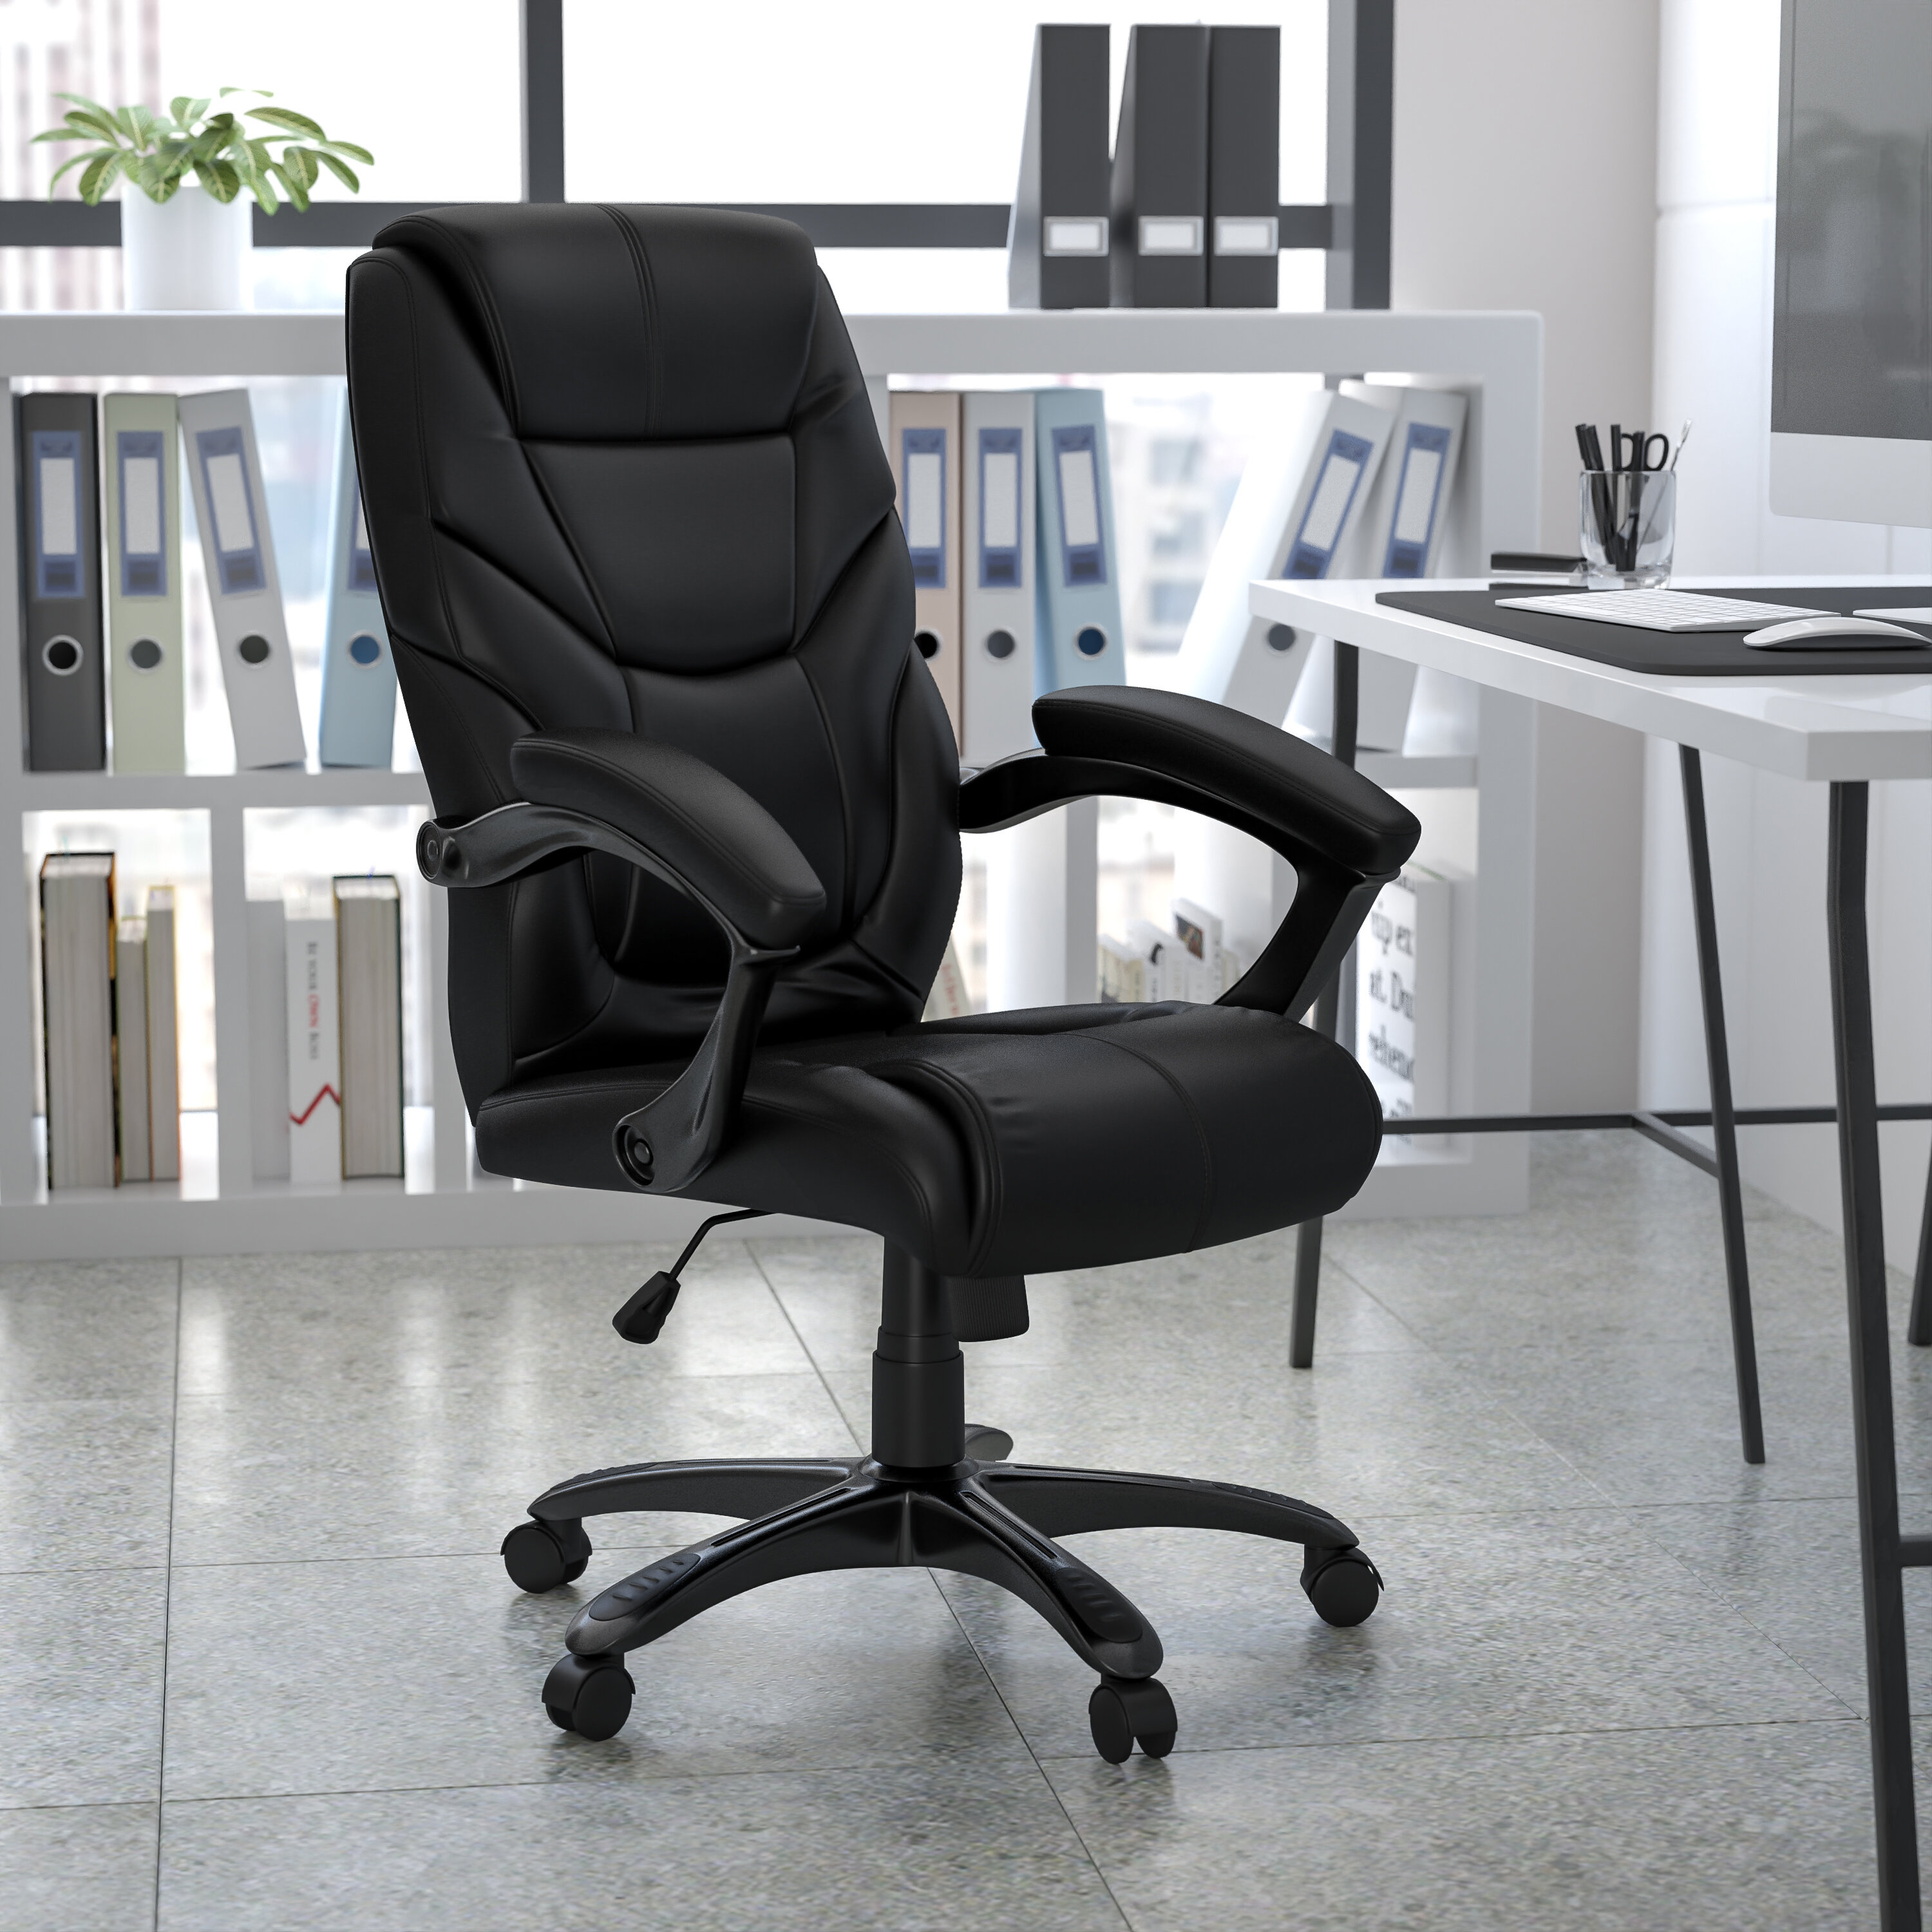 Xzavier Executive Swivel Ergonomic Office Chair with High Back Design,  Padded Arms